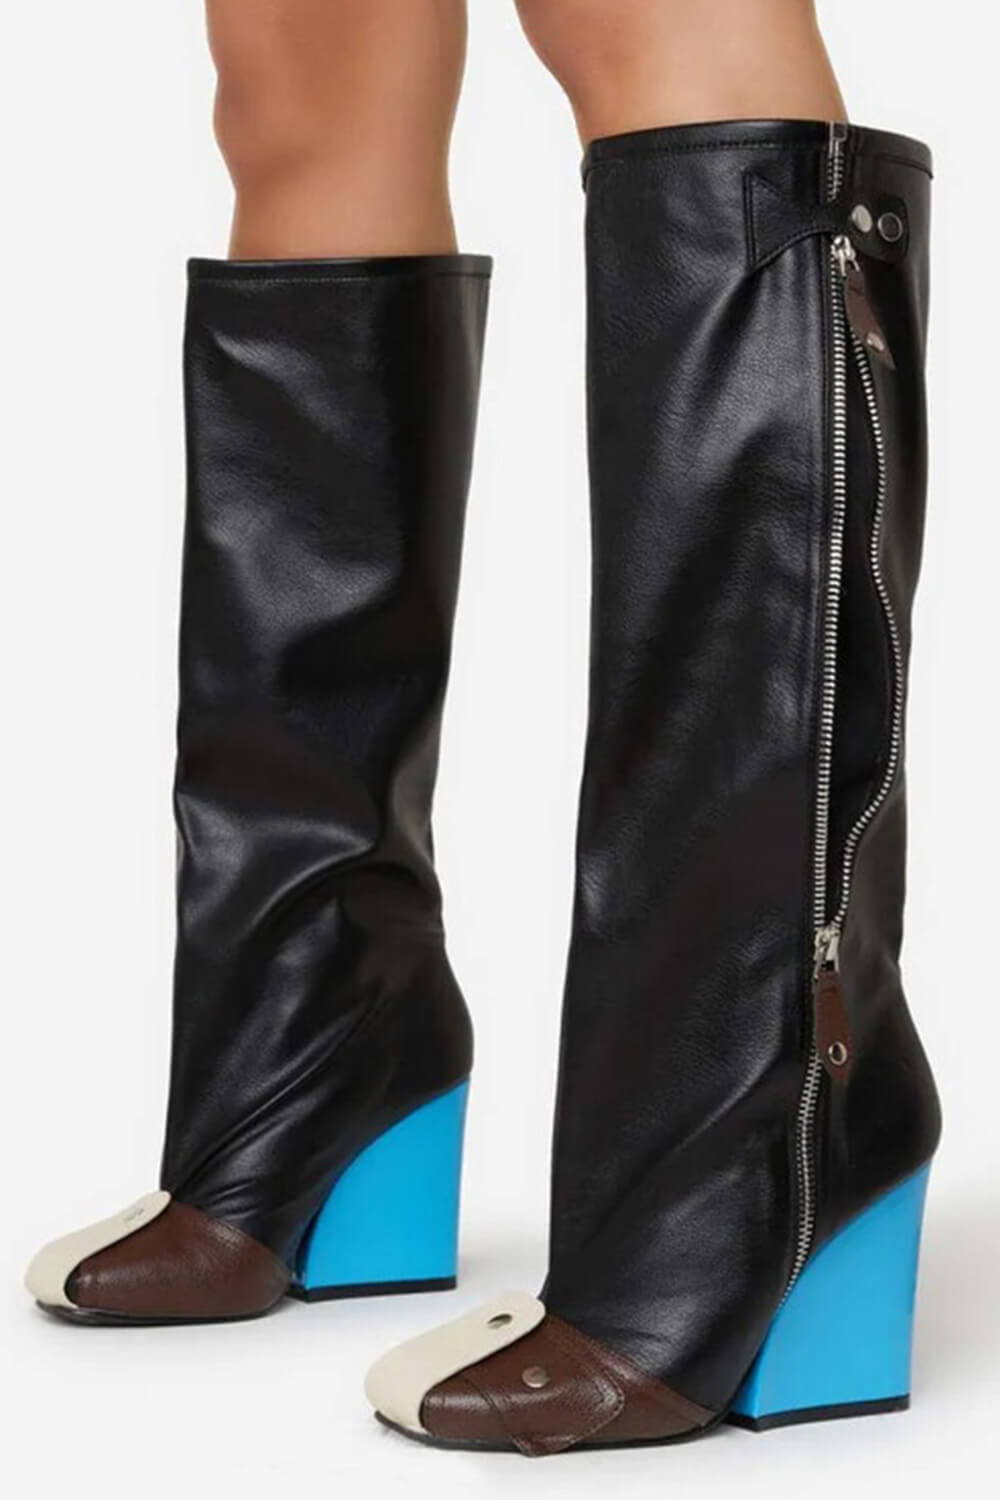 Buckle Detail Square Toe Blue Wedge Heel Knee High Long Boots